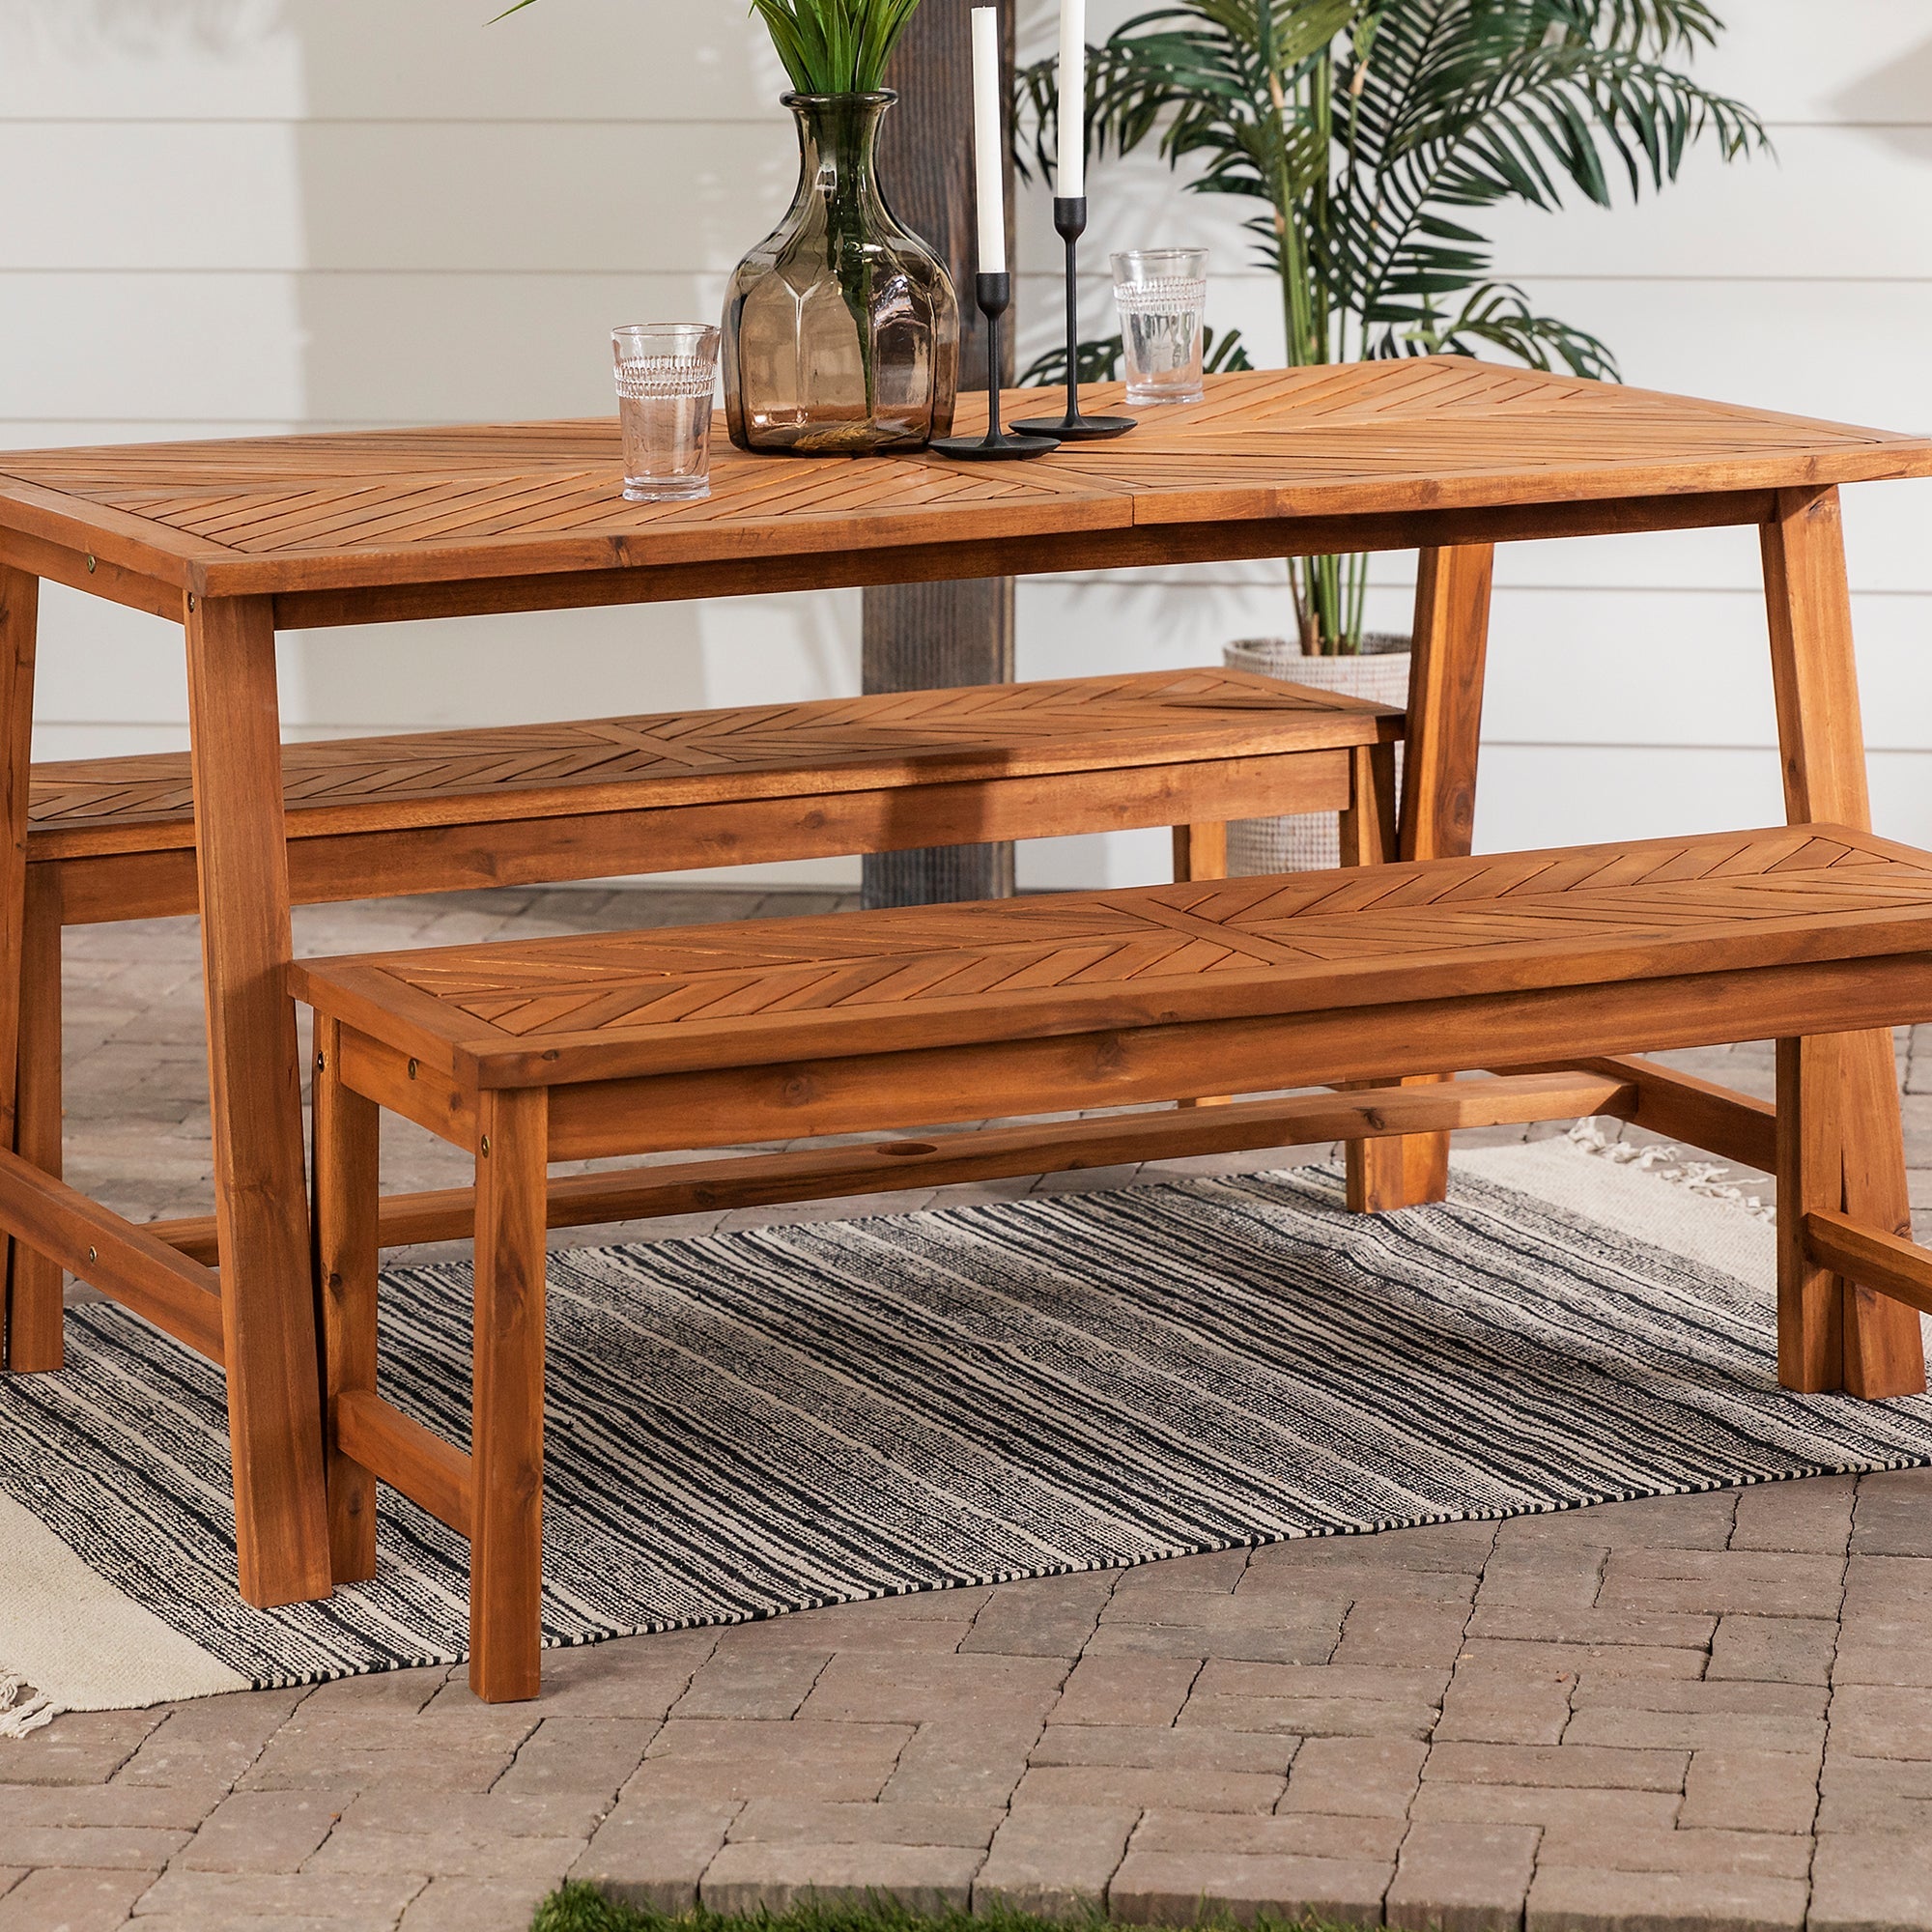 Vincent 3 Piece Acacia Wood Outdoor Chevron Picnic Dining Table Set - East Shore Modern Home Furnishings